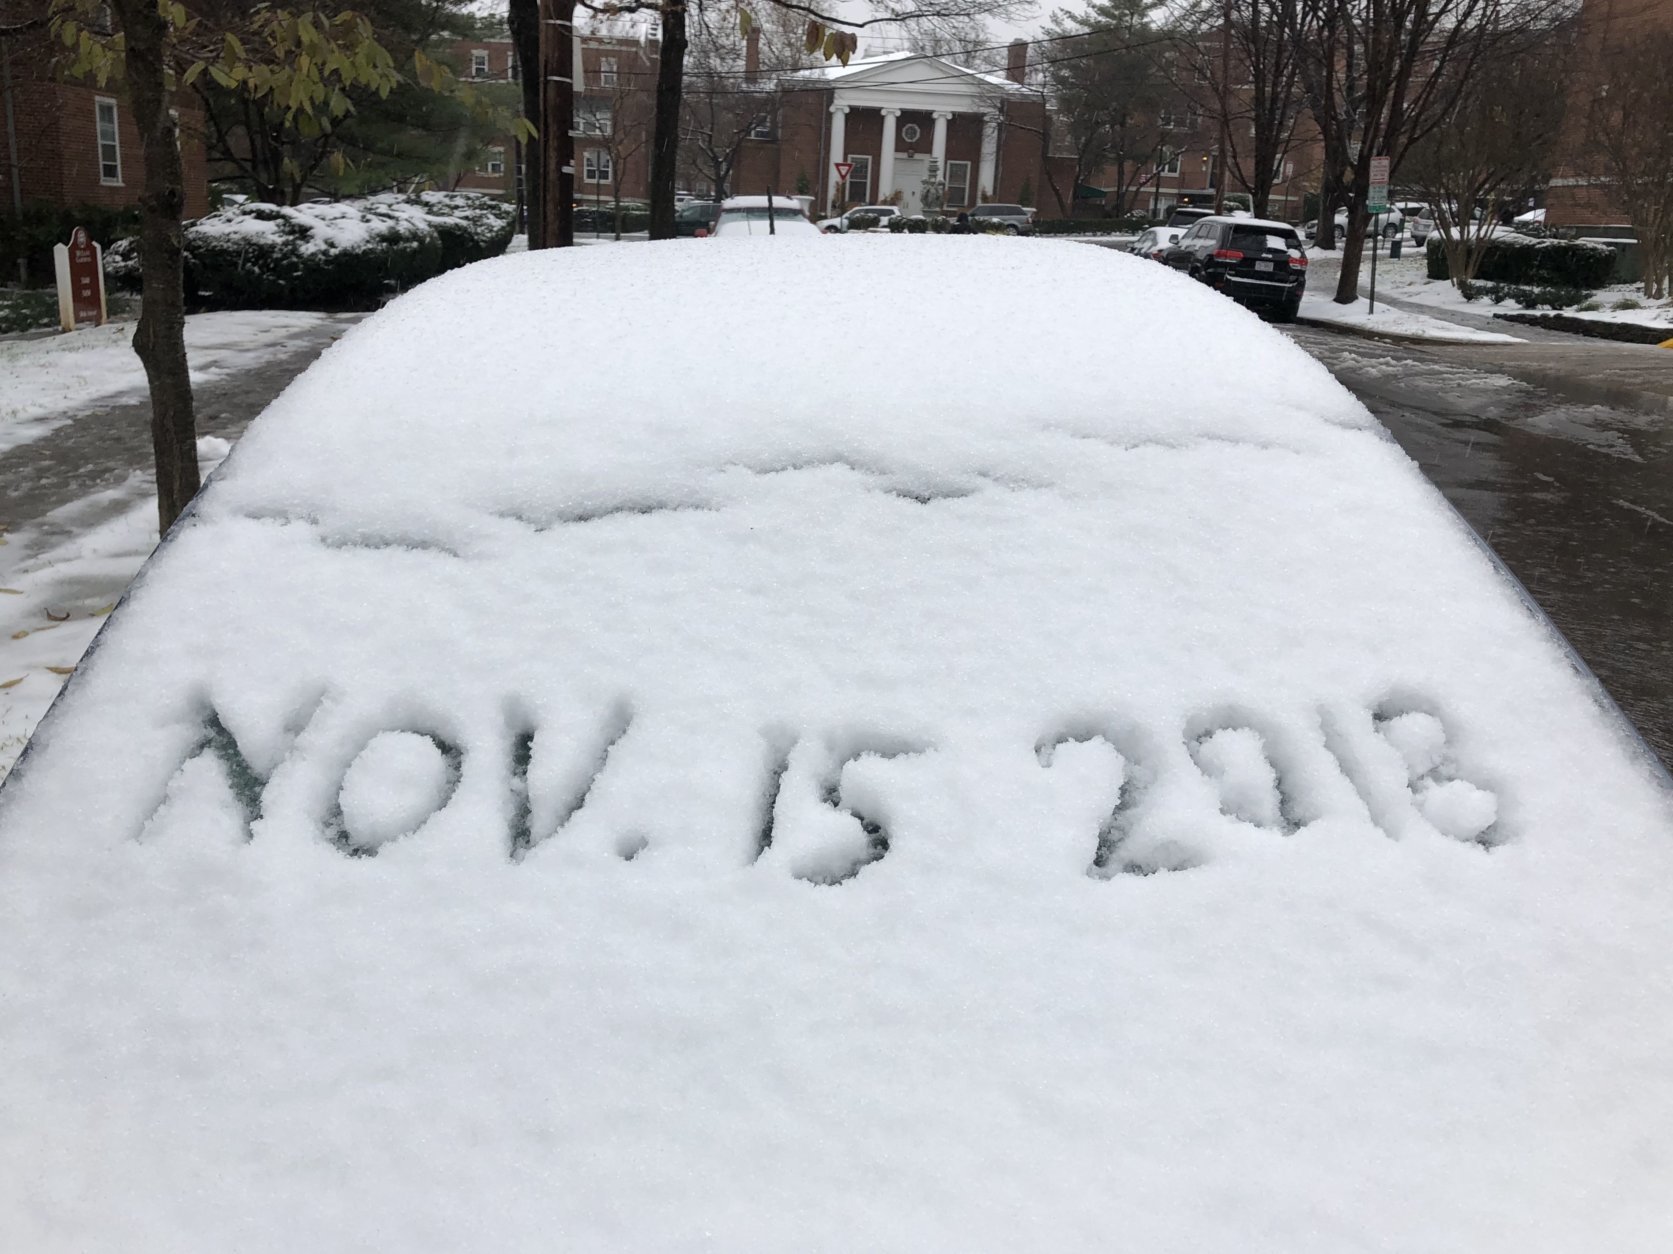 Snow covers car windshields in Northwest Washington, D.C.. (WTOP/Dave Dildine)